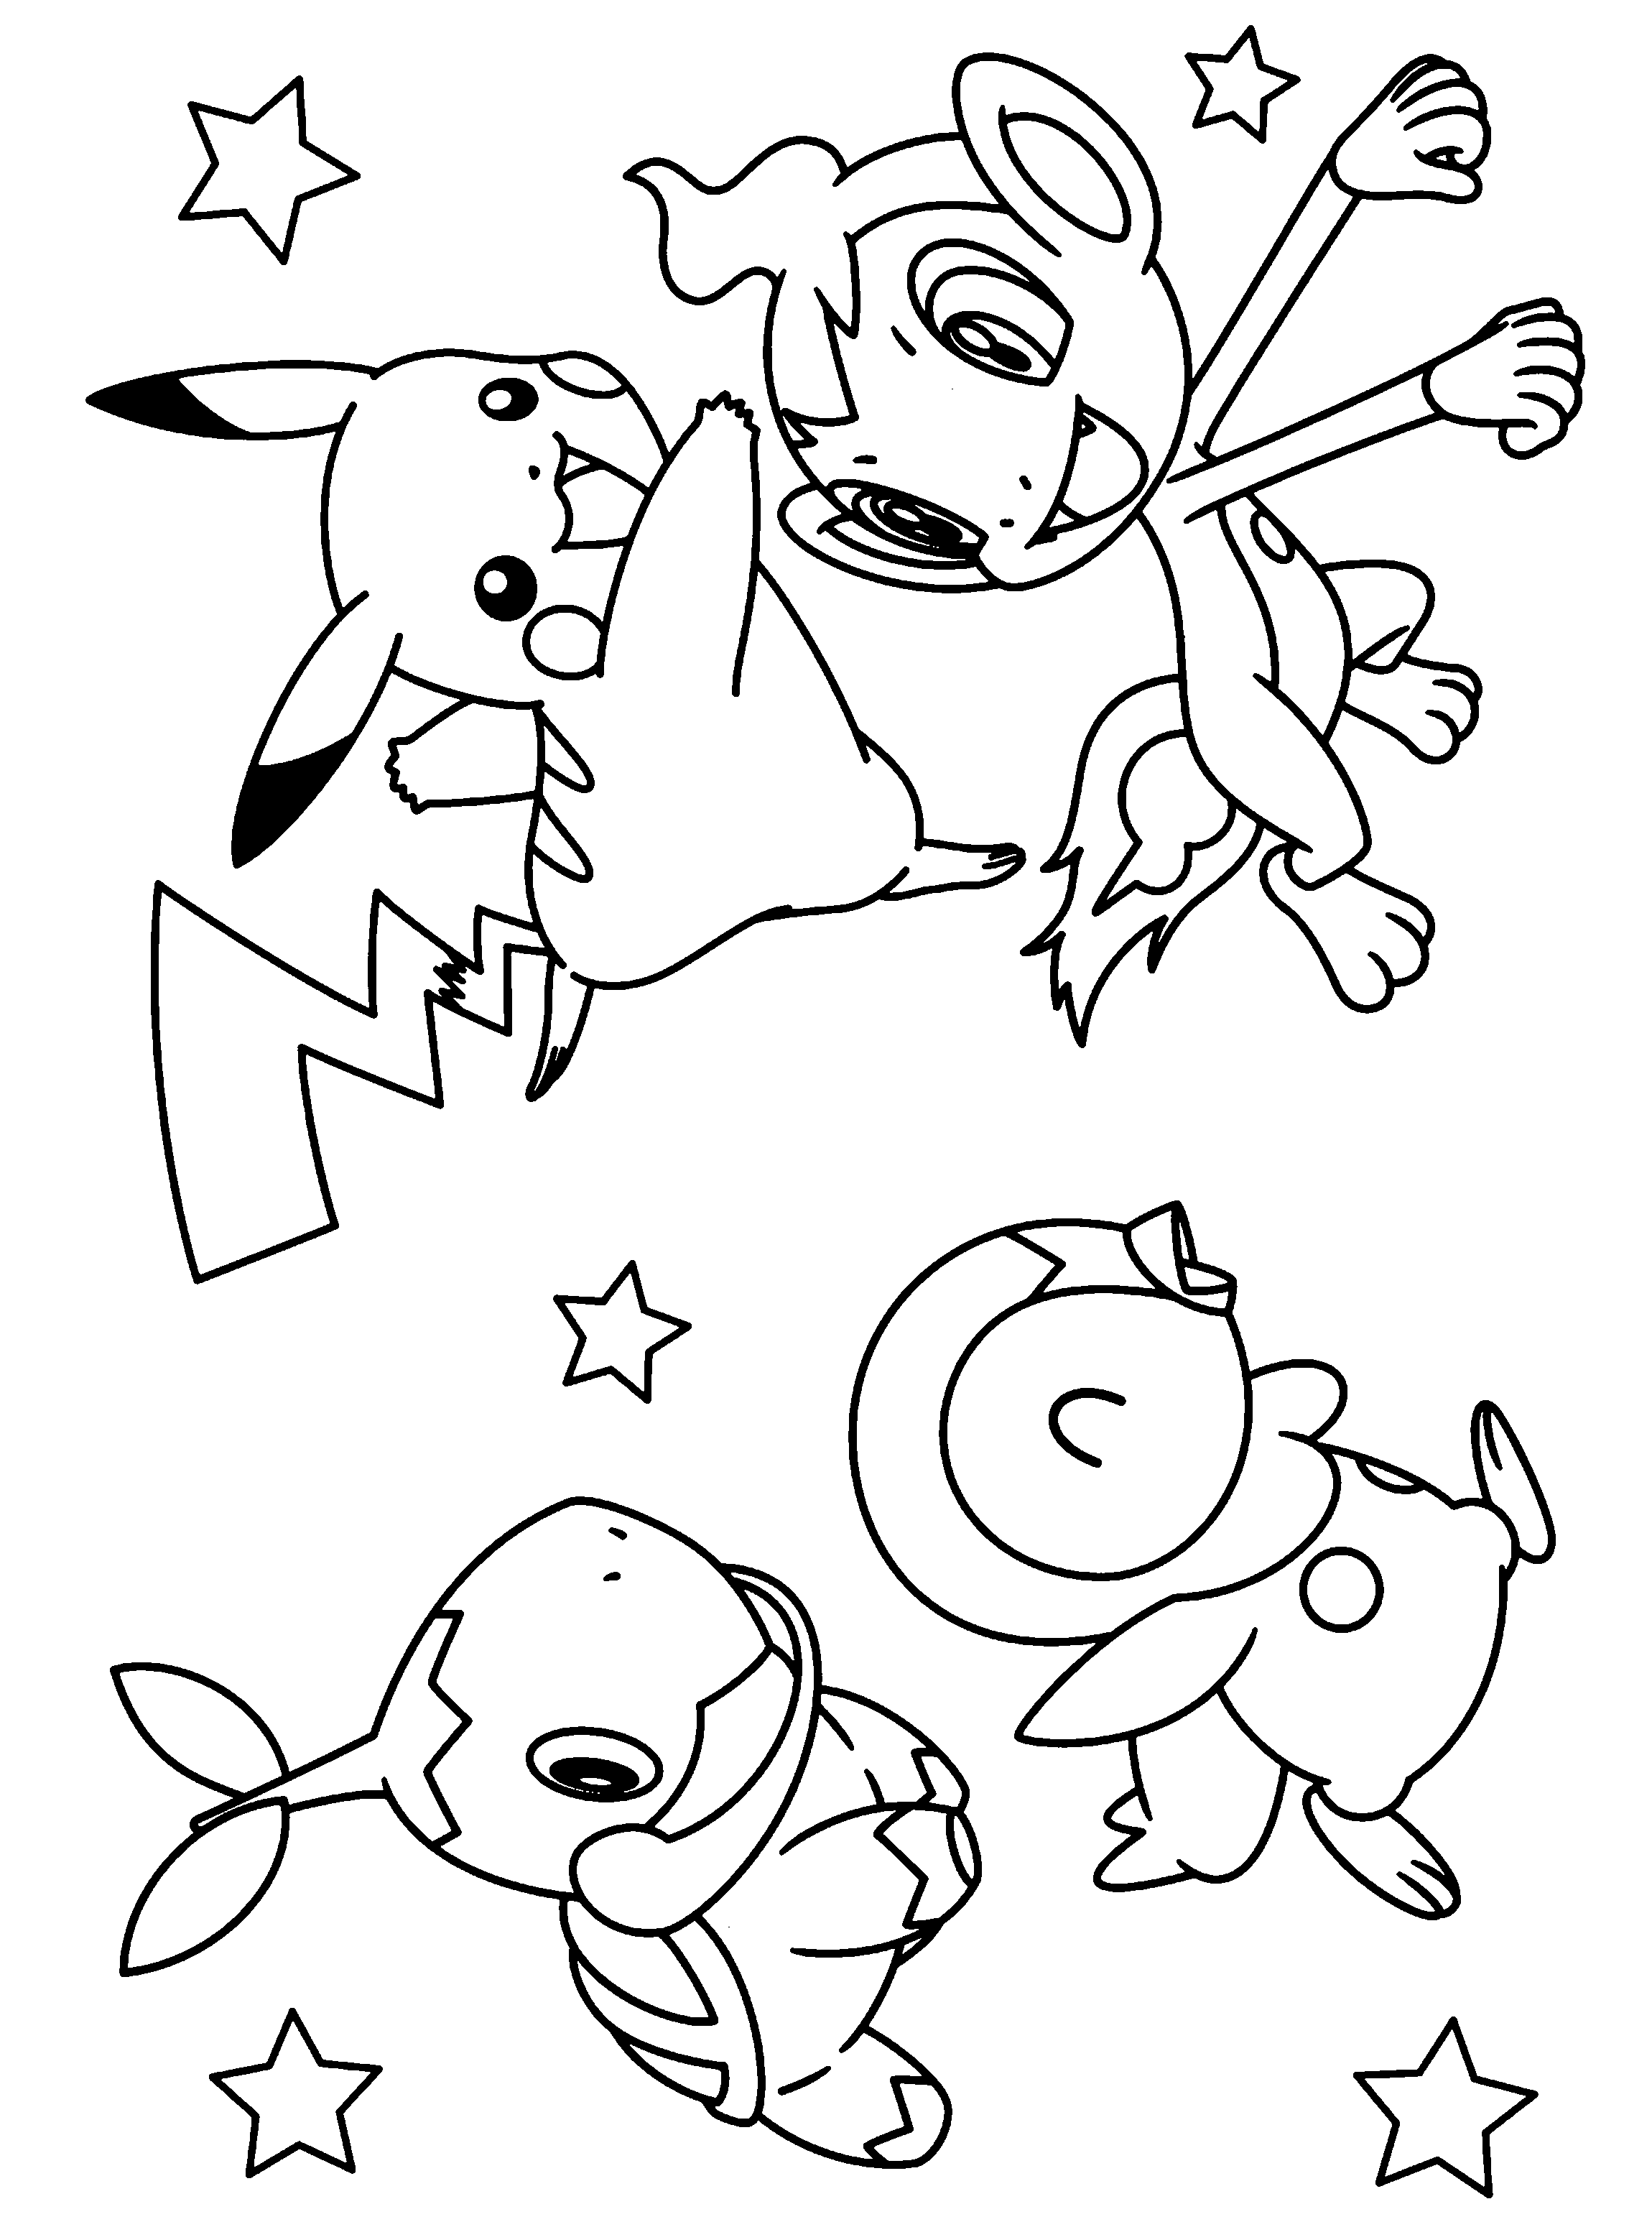 coloring pages for pokemon free printable pokemon coloring pages 37 pics how to pokemon coloring pages for 